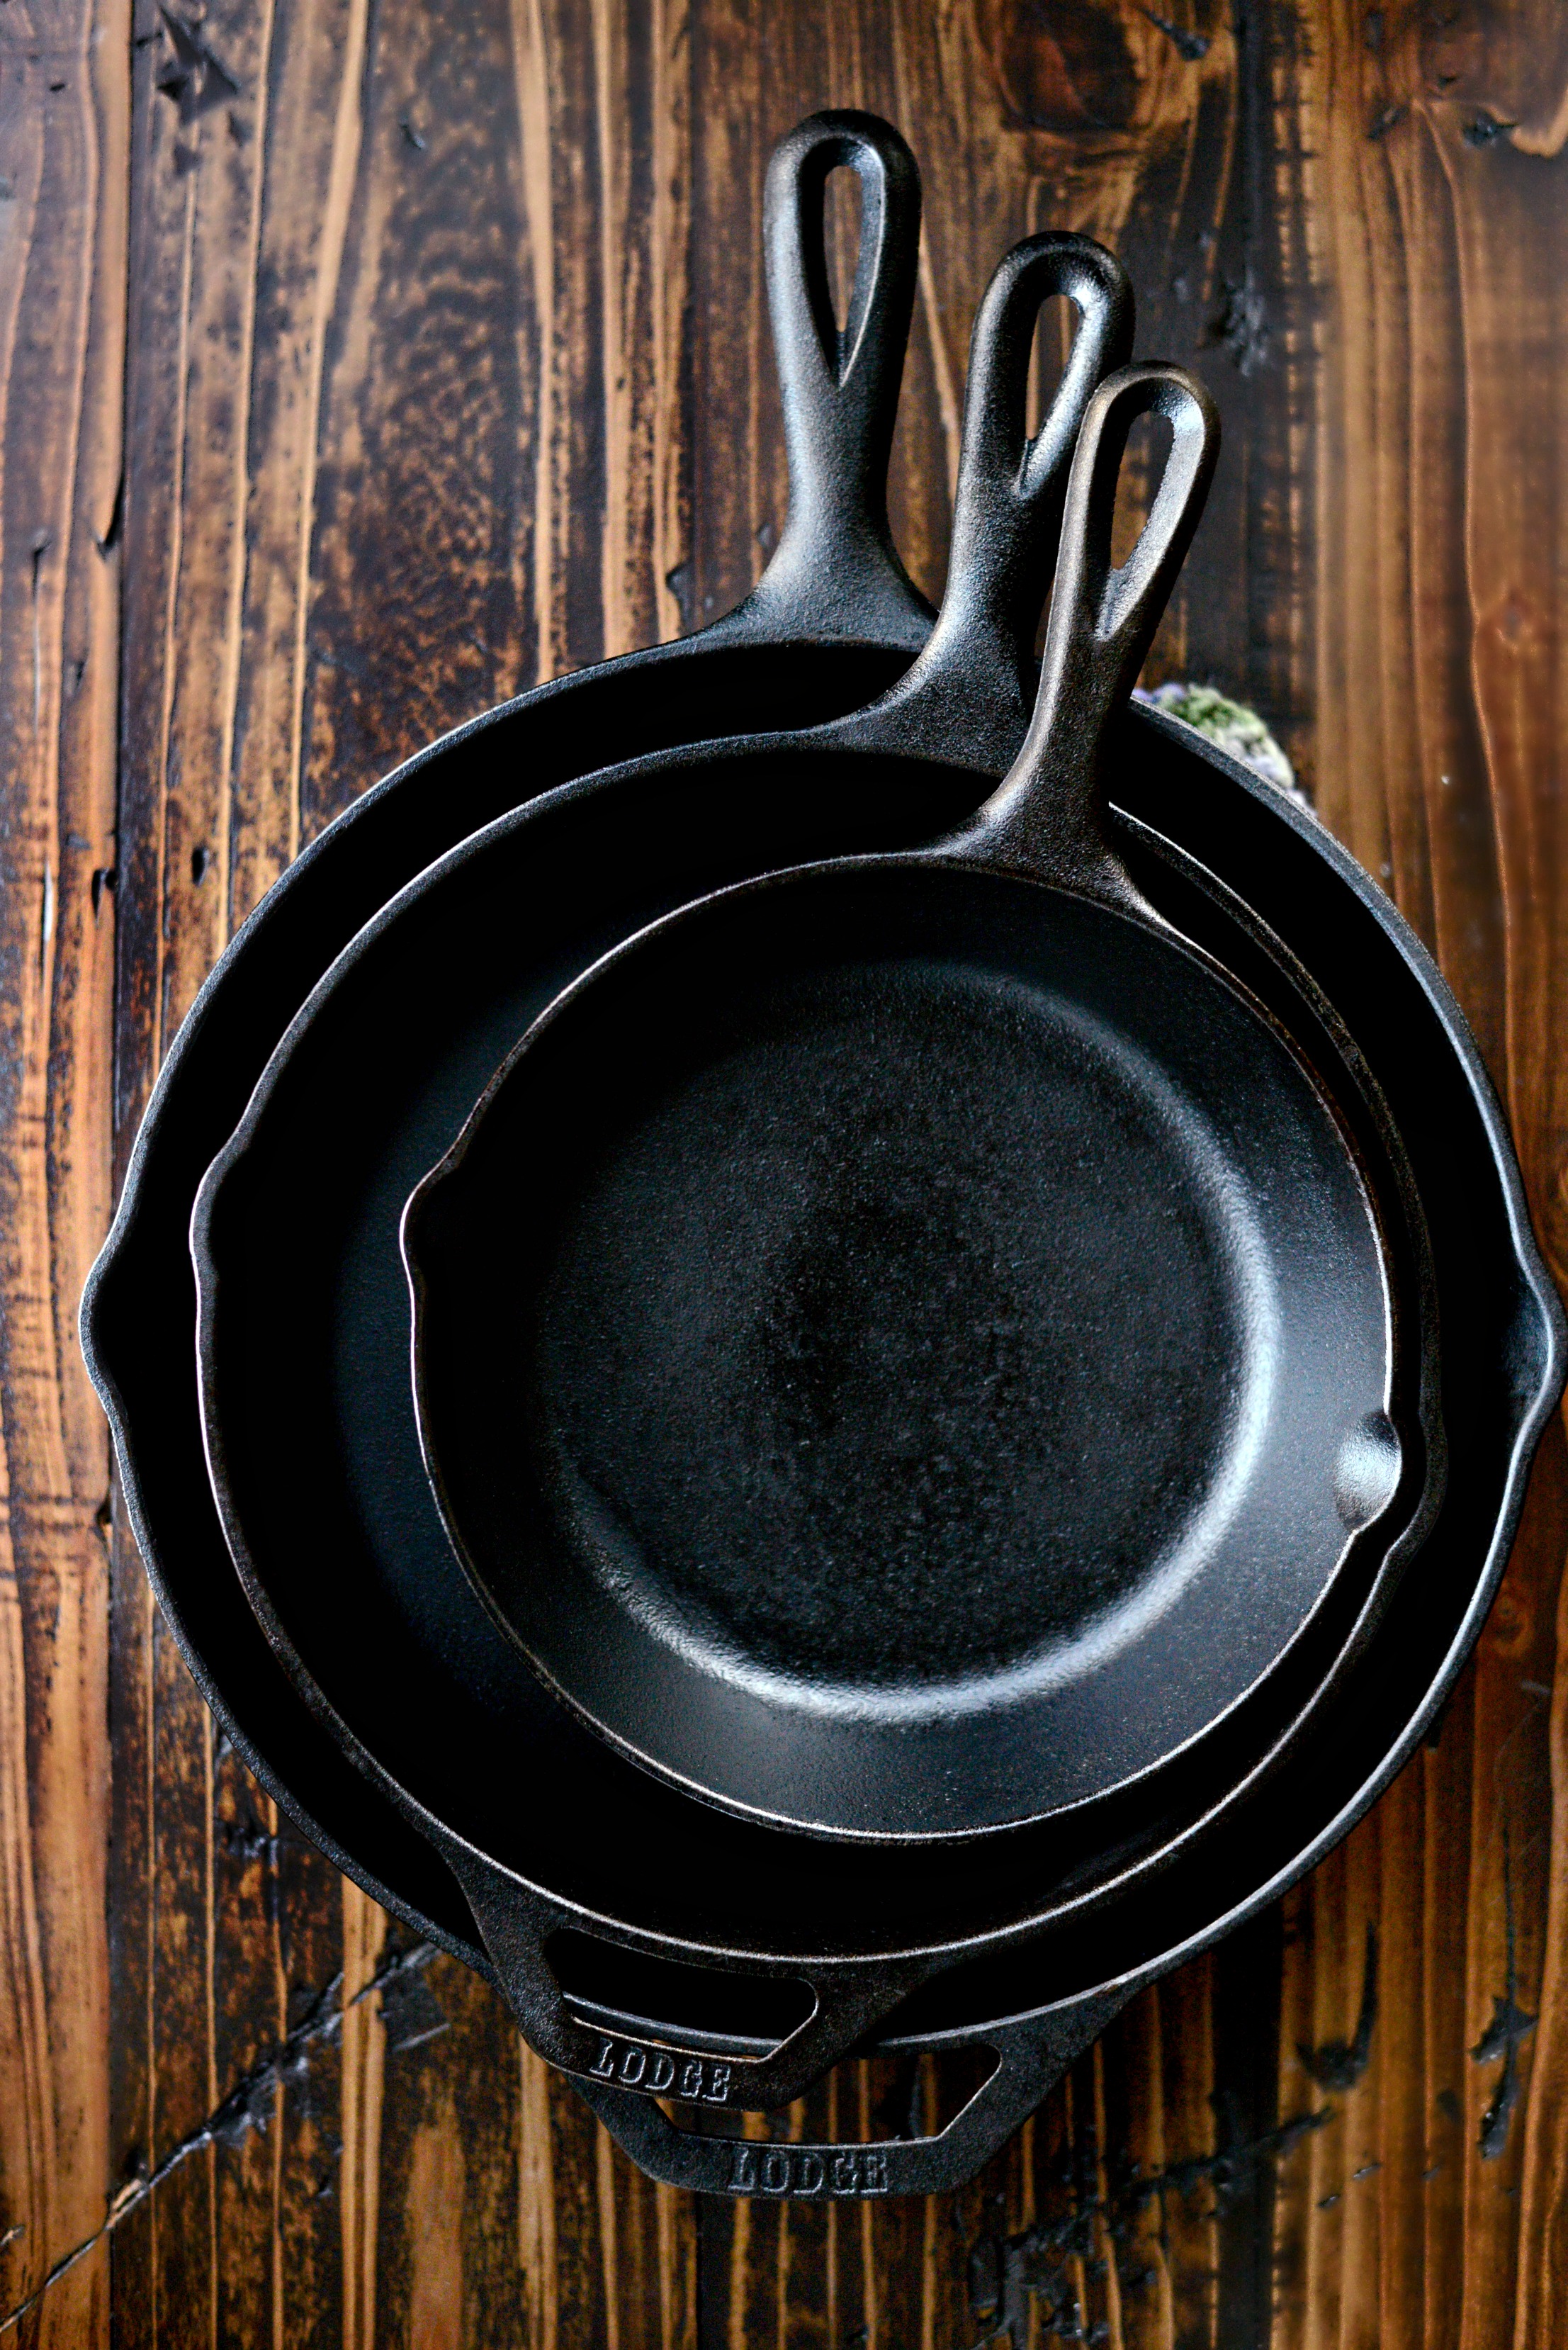 I'm taking great care of this Lodge cast iron skillet. After use I scrape  it out with some hot water while the pan is hot and then wipe it down with a